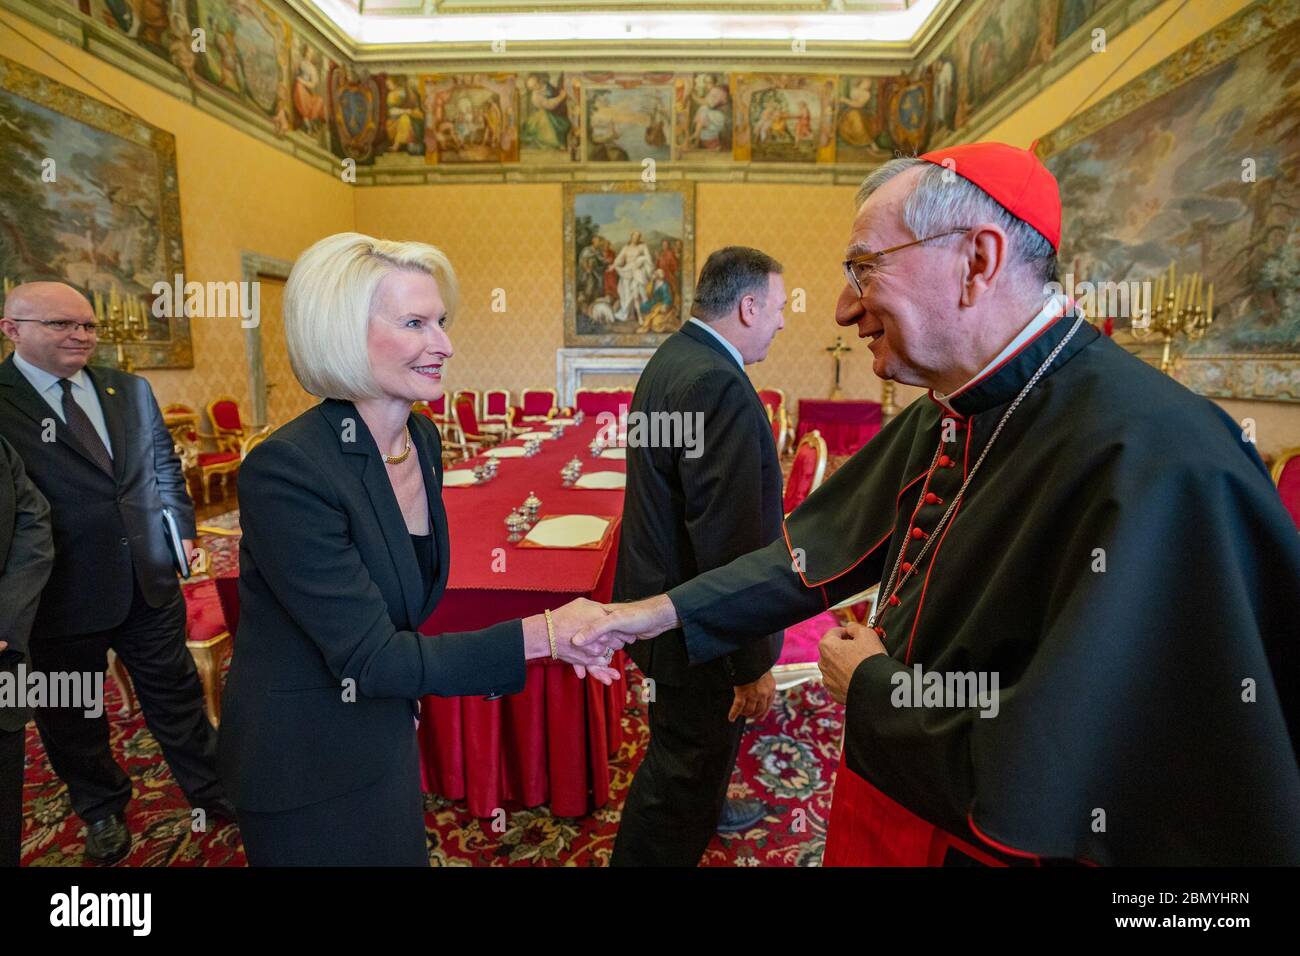 Secretary Pompeo Meets with Cardinal Parolin and Archbishop Gallagher U.S. Secretary of State Michael R. Pompeo and U.S. Ambassador to the Holy See Callista Gingrich meet with Vatican Secretary of State Cardinal Pietro Parolin and Secretary for Relations with States Archbishop Paul Gallagher in Vatican City, on October 2, 2019. Stock Photo